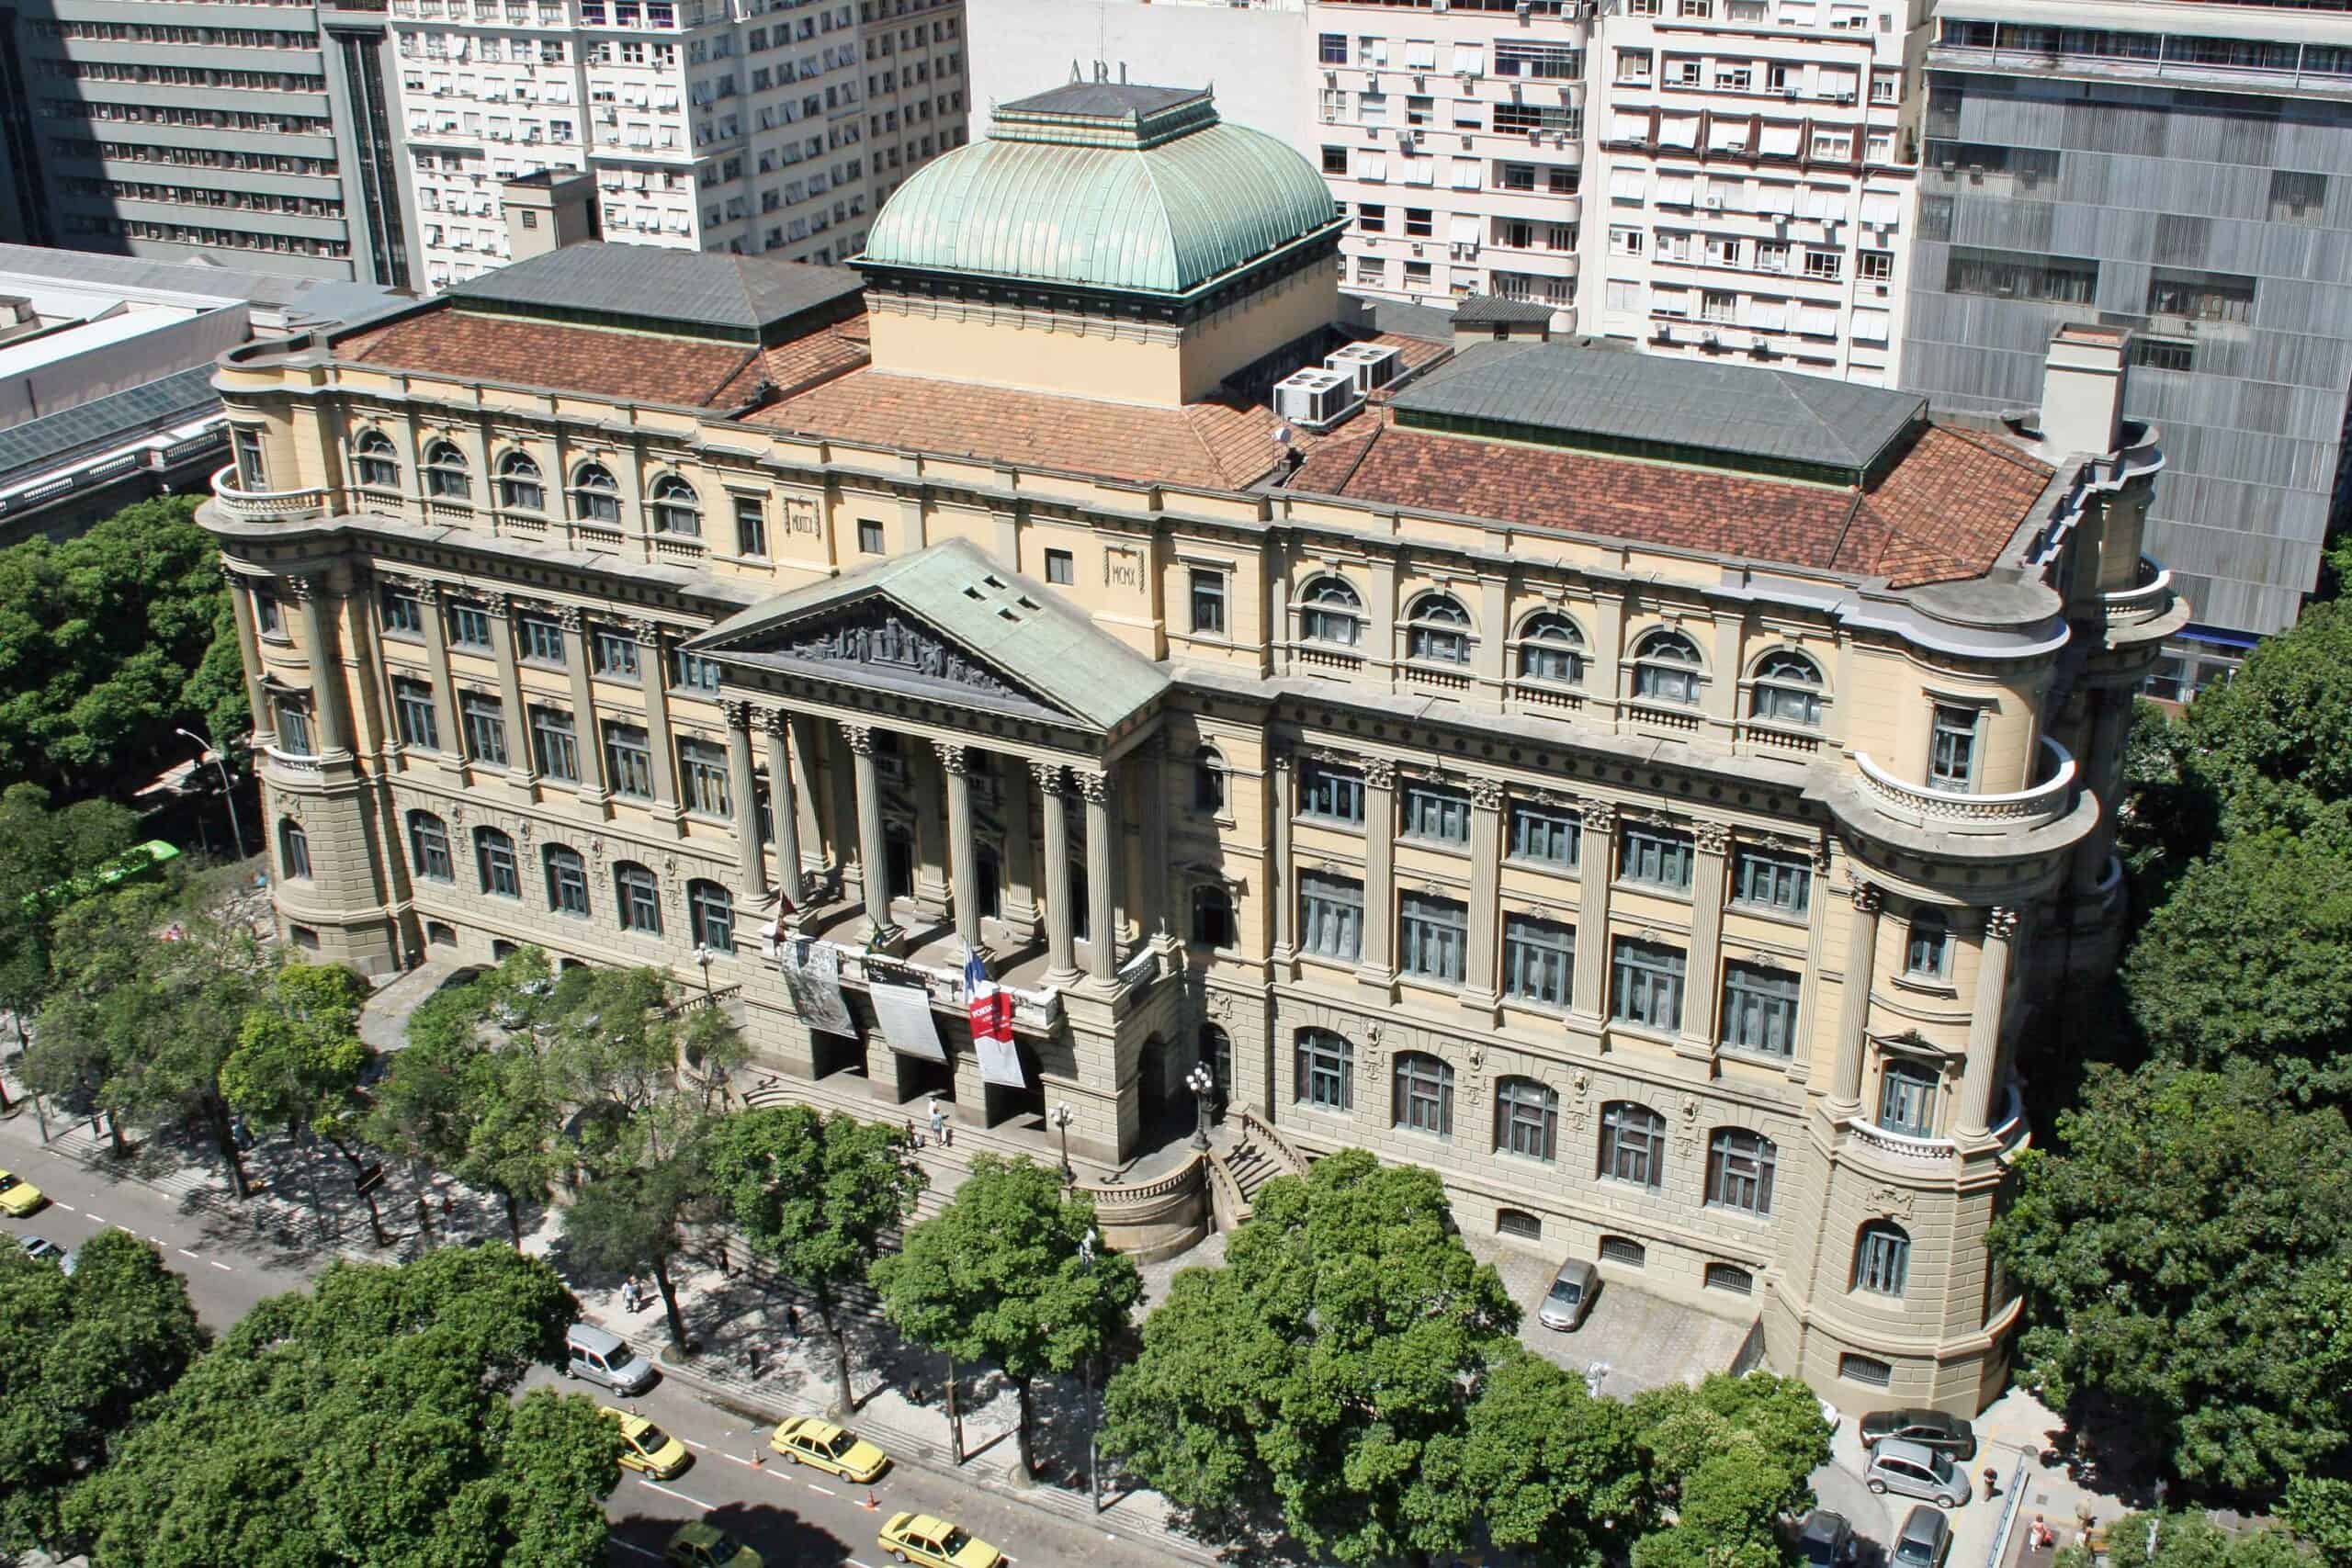 National library of Brazil